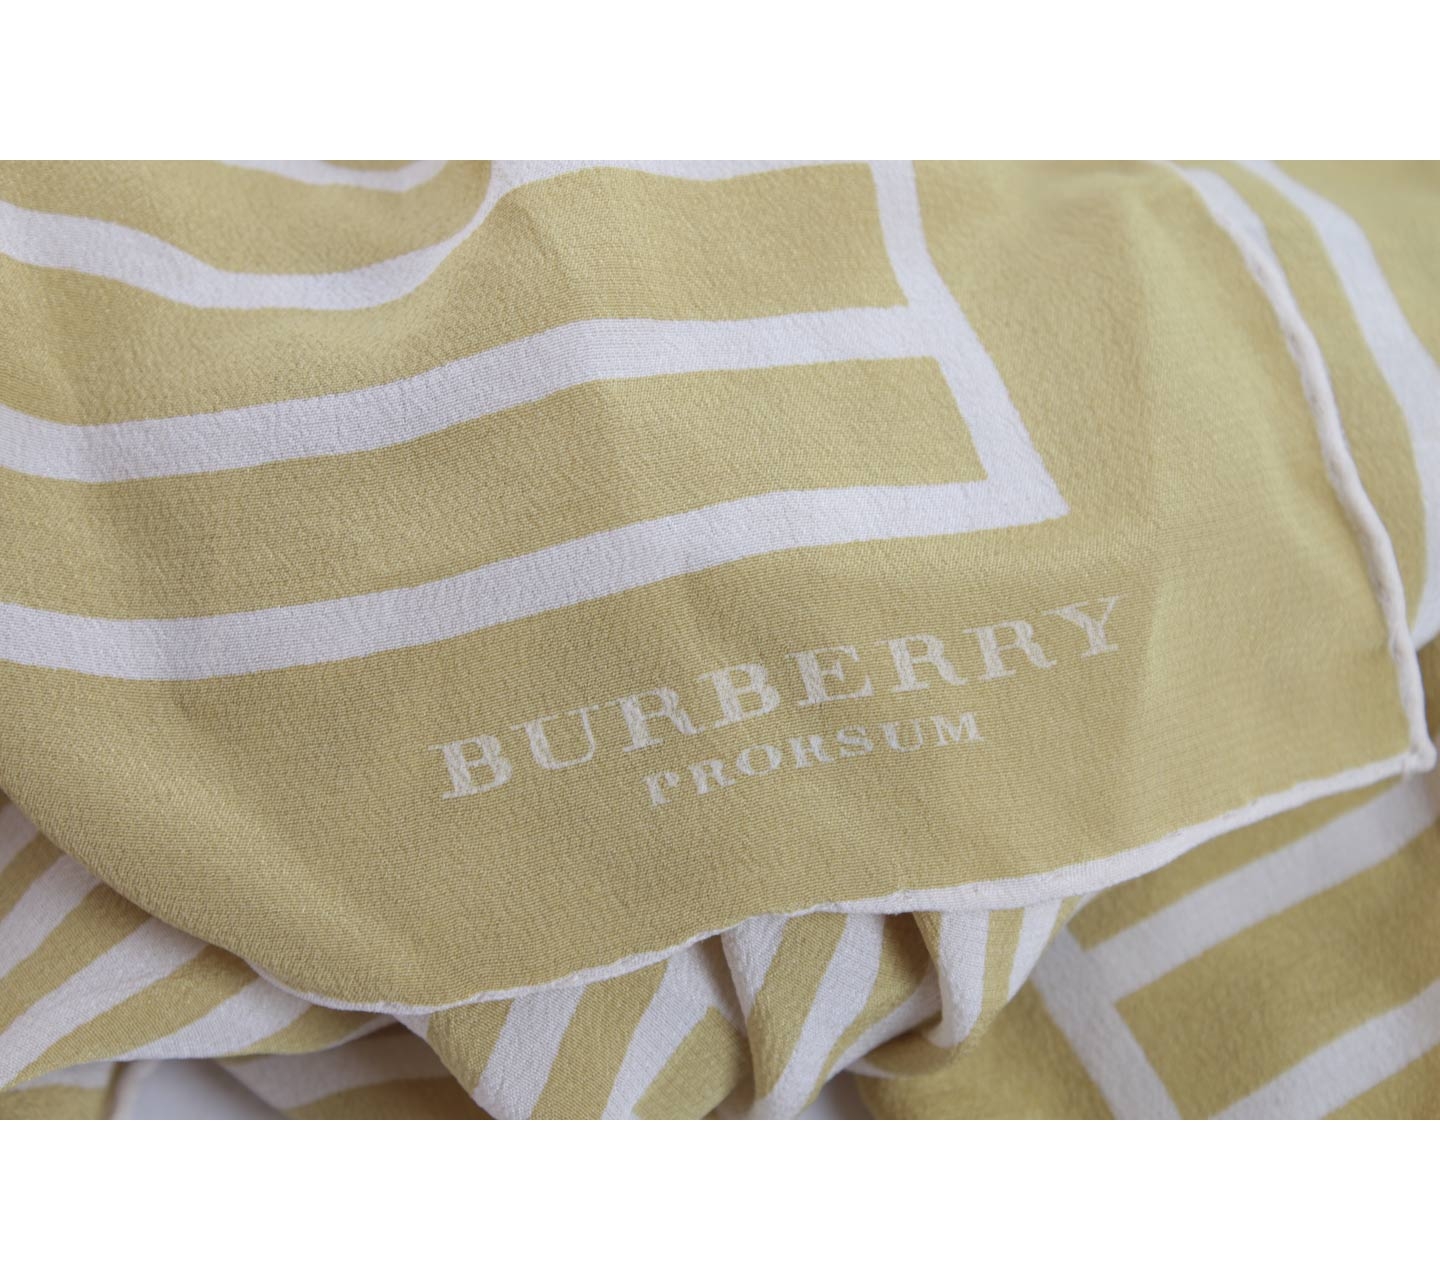 Burberry Yellow And White Striped Scarf